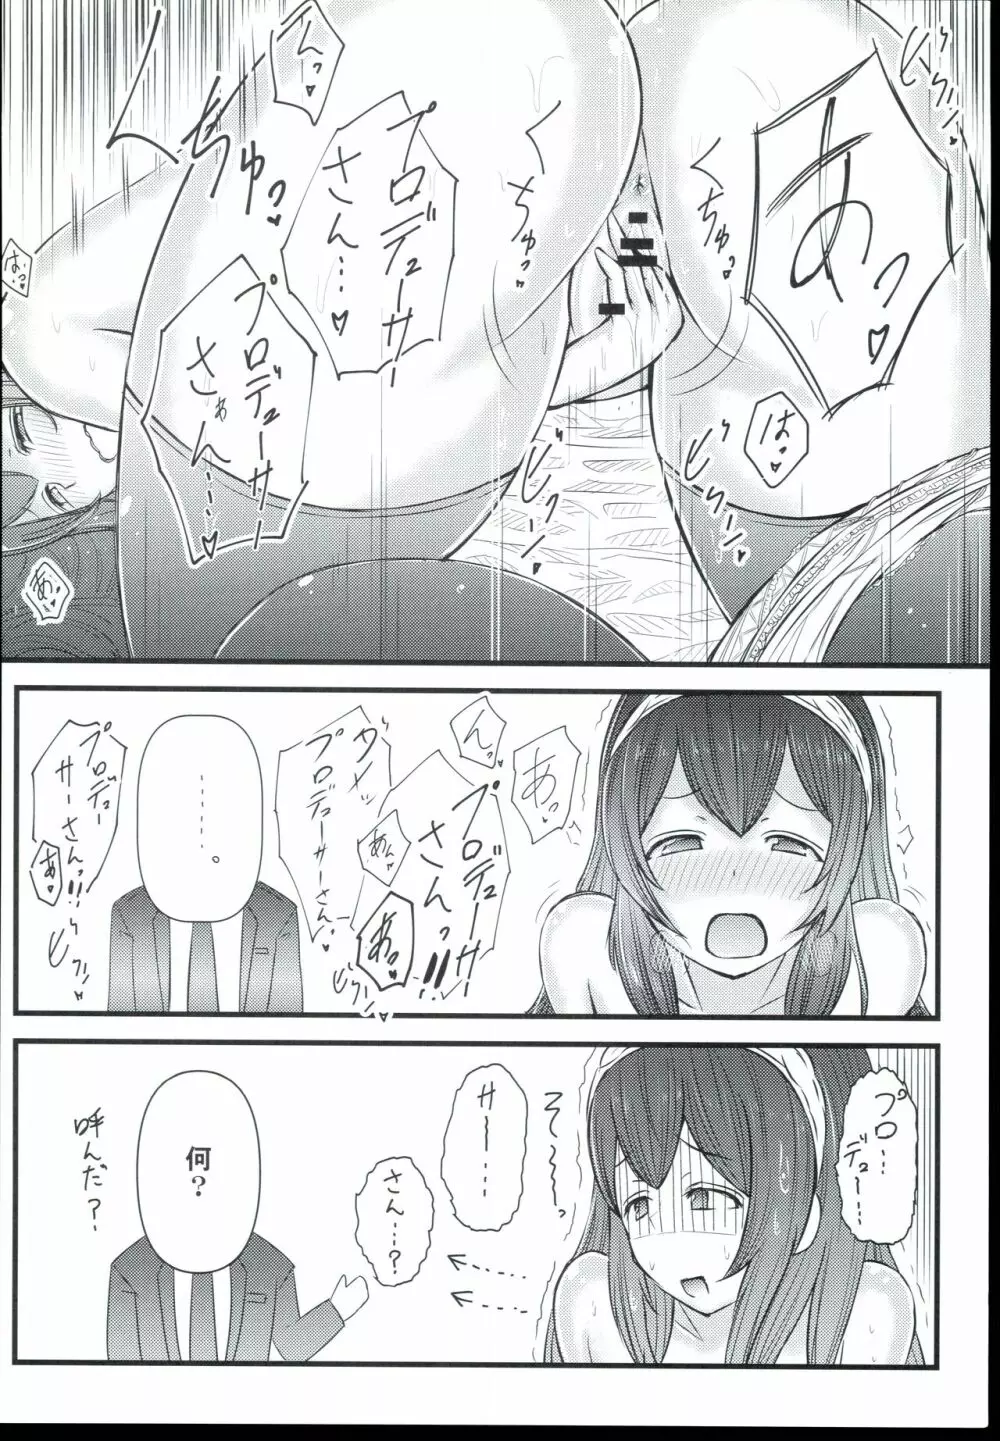 ふみふみ？ふみふみ。ふみふみ…ふみふみ!! - page8